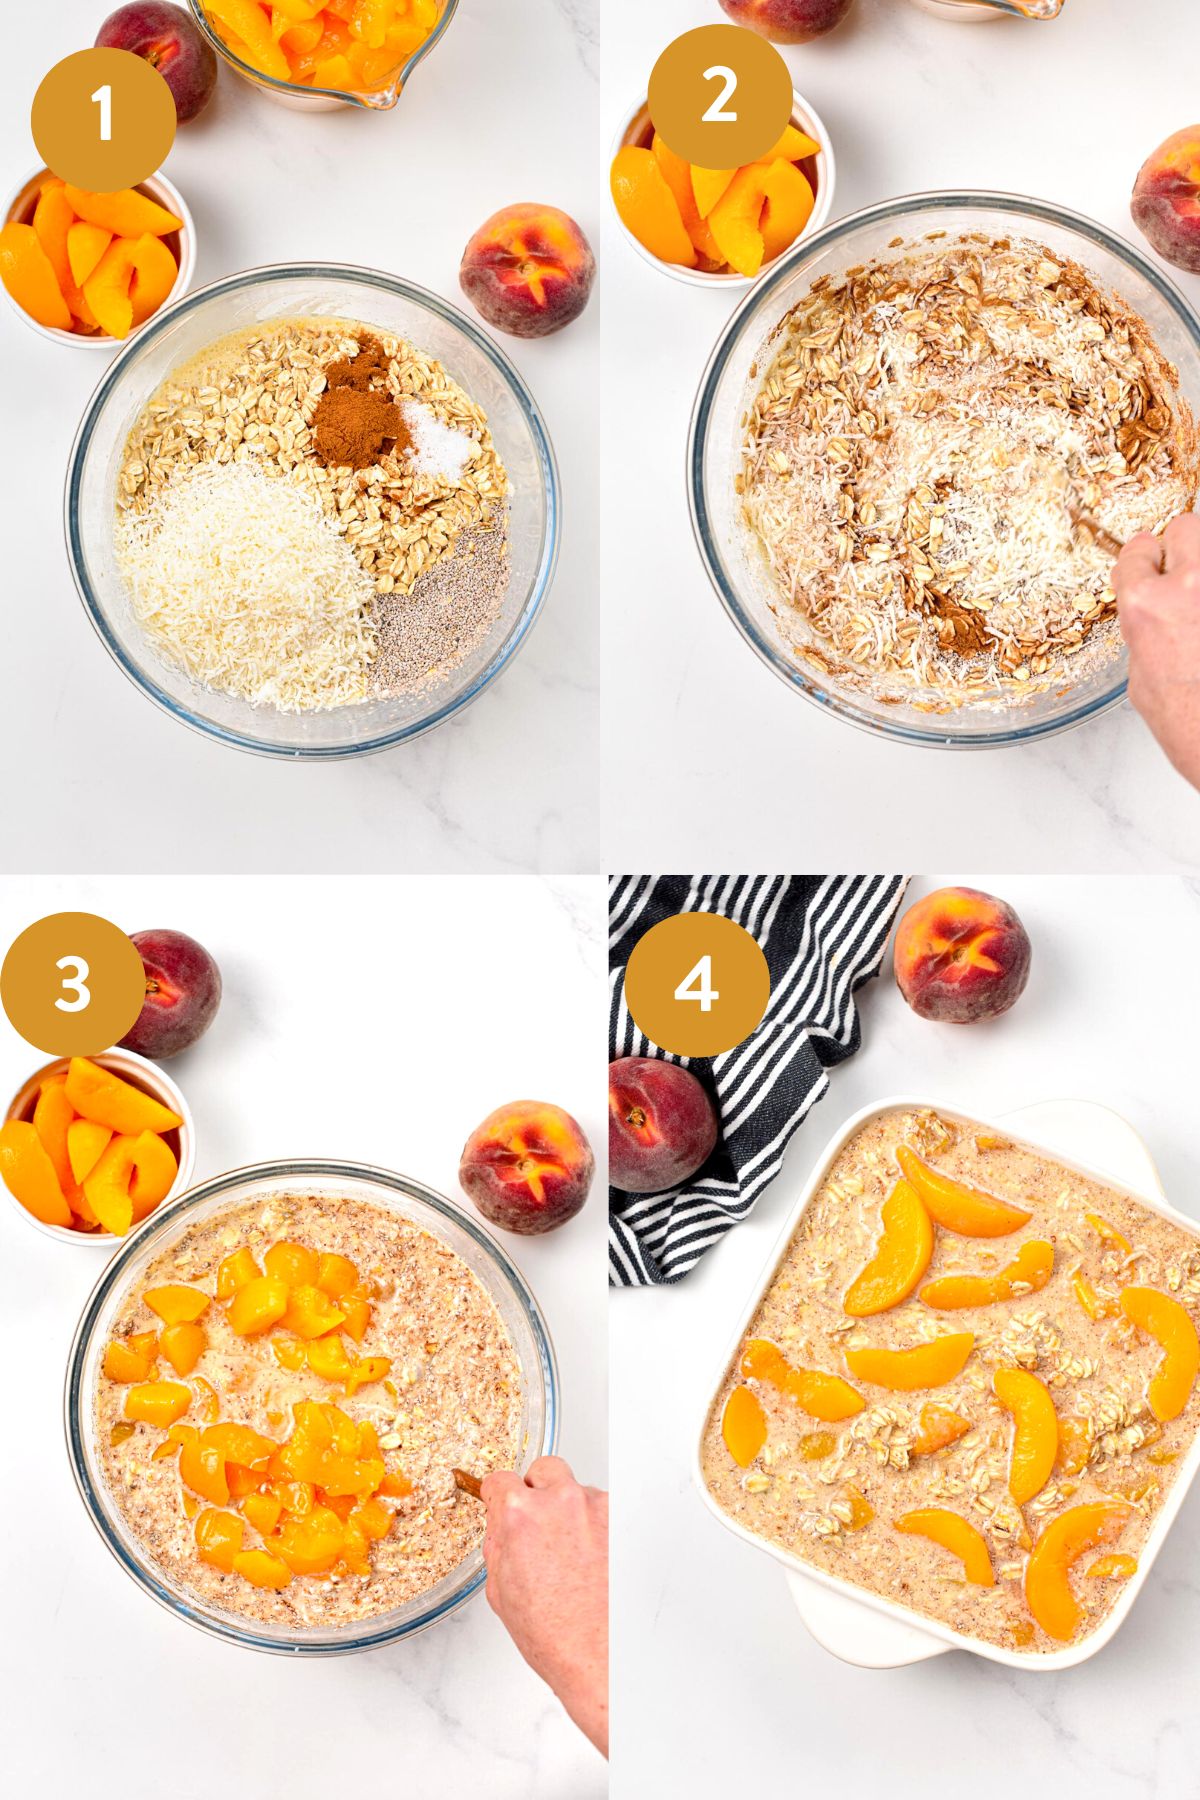 This Peach Baked Oatmeal isa creamy large batch of baked oatmeal filled with juicy peach. The perfect healthy family summer breakfast to use all your peaches this summer.